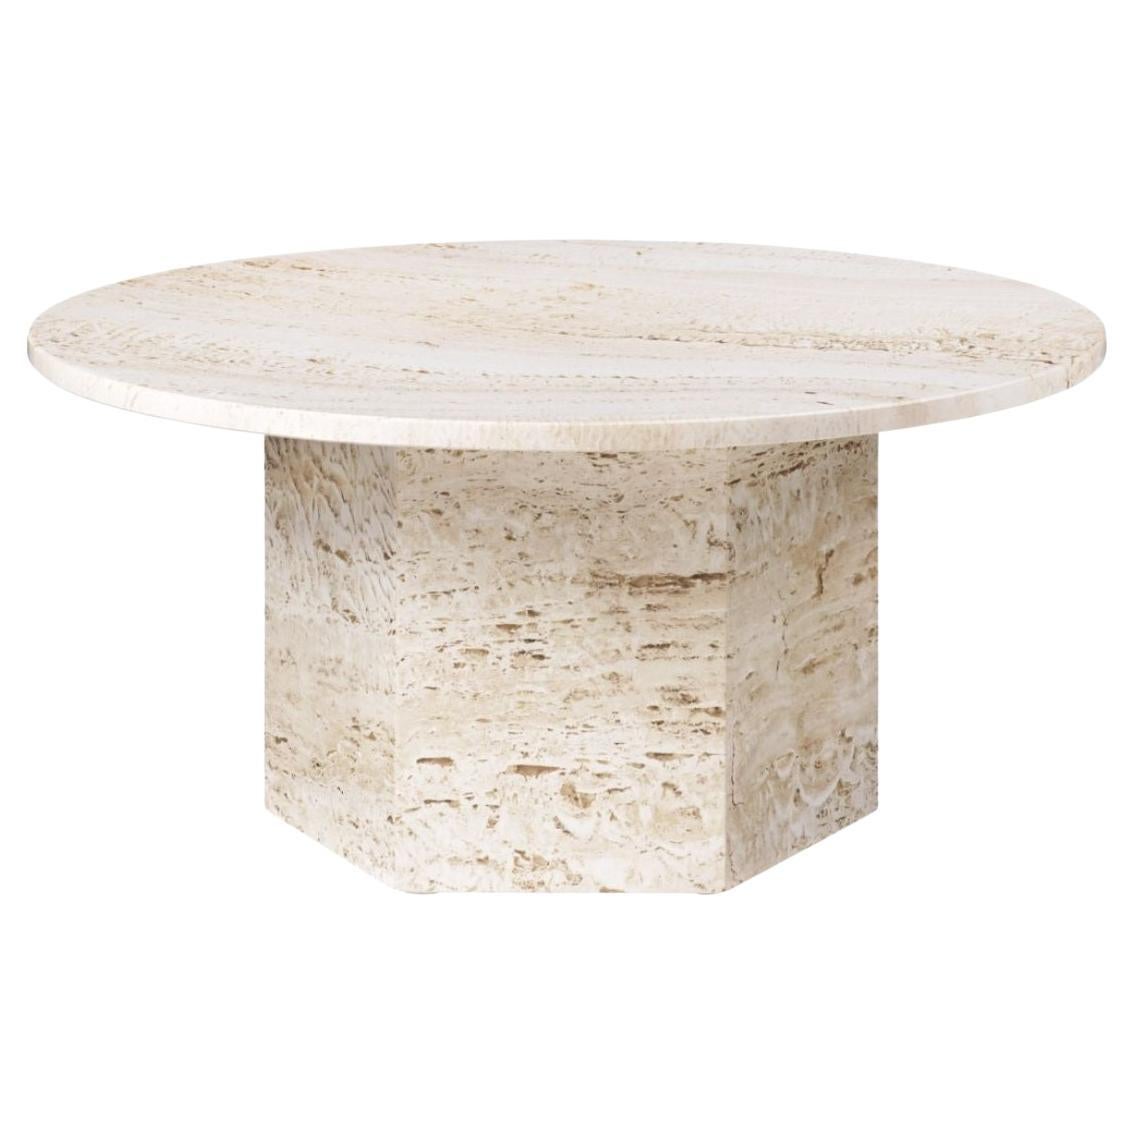 Contemporary Large Travertine Epic Table by Gamfratesi for Gubi For Sale